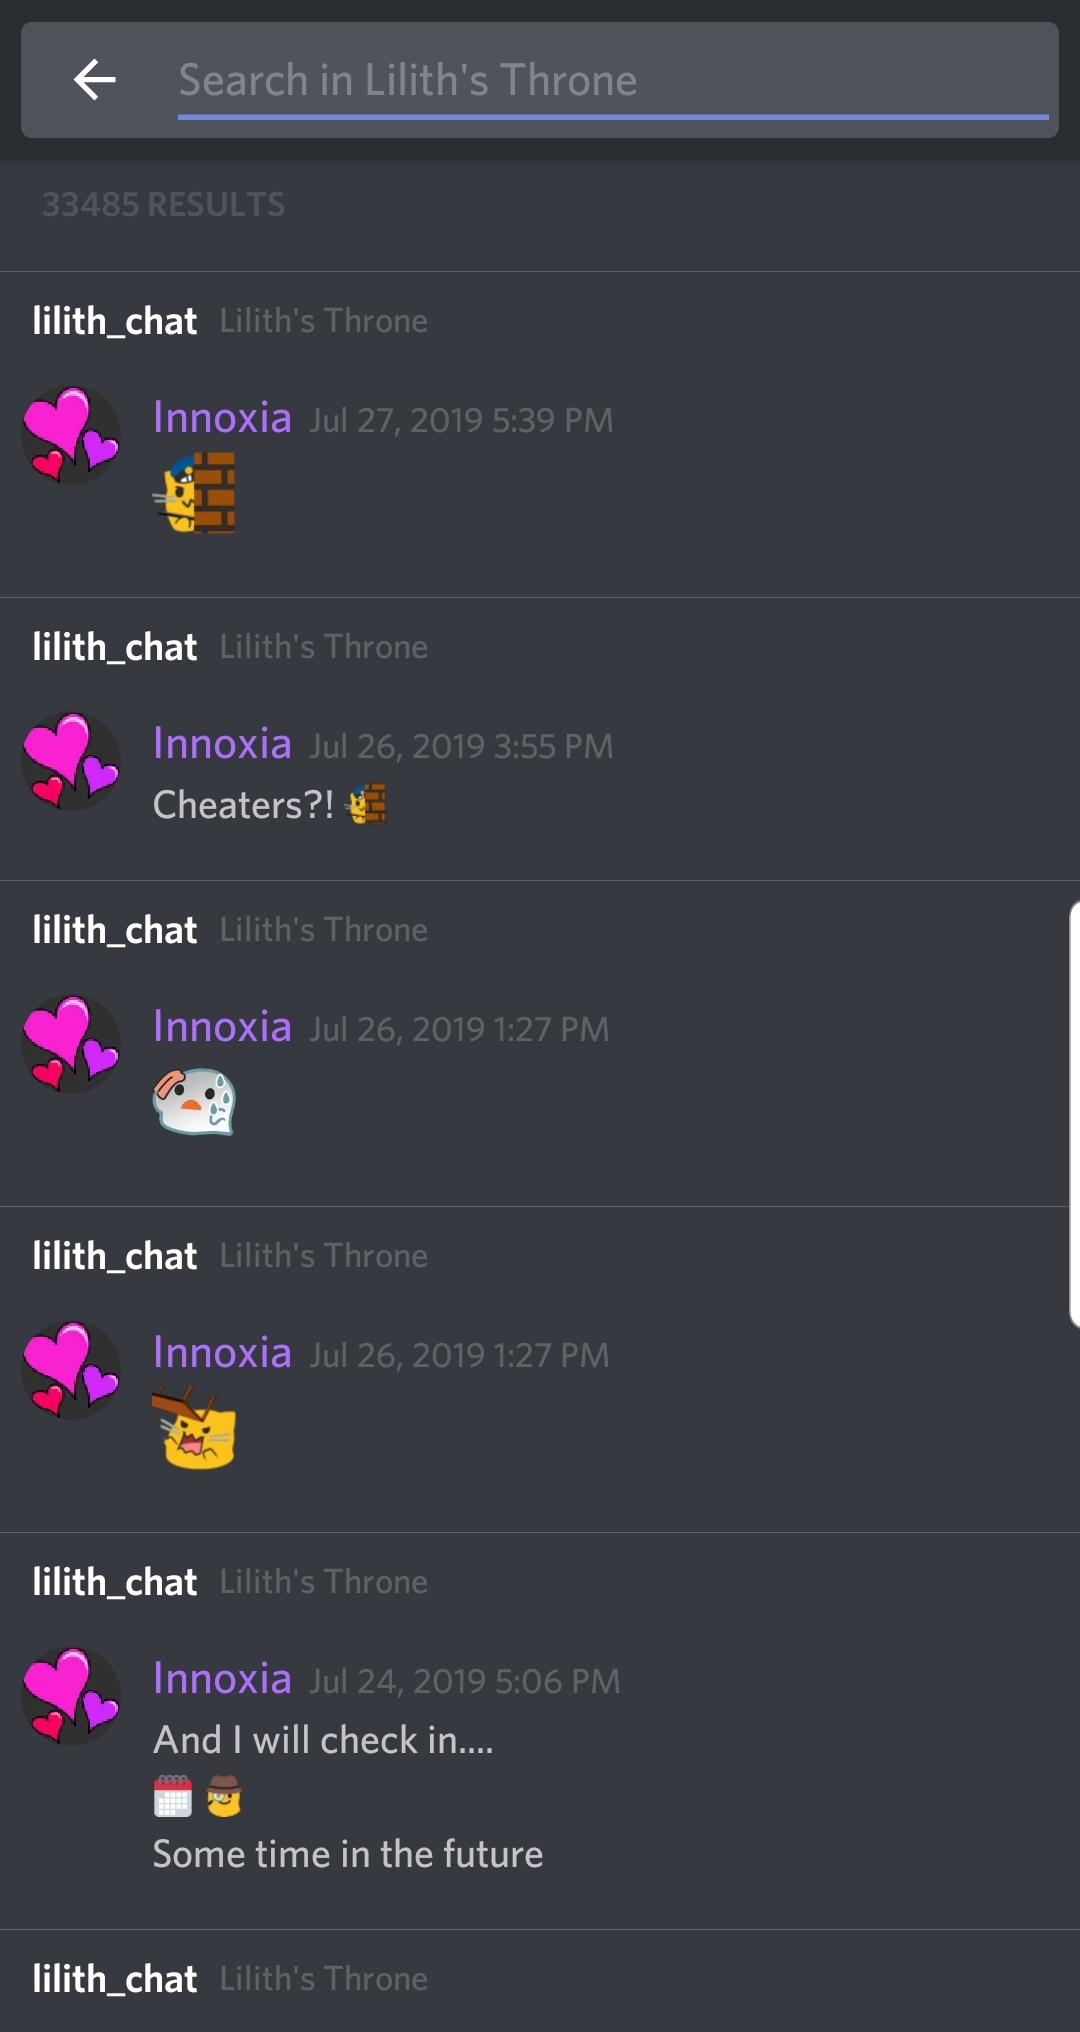 She has been pretty active on discord 